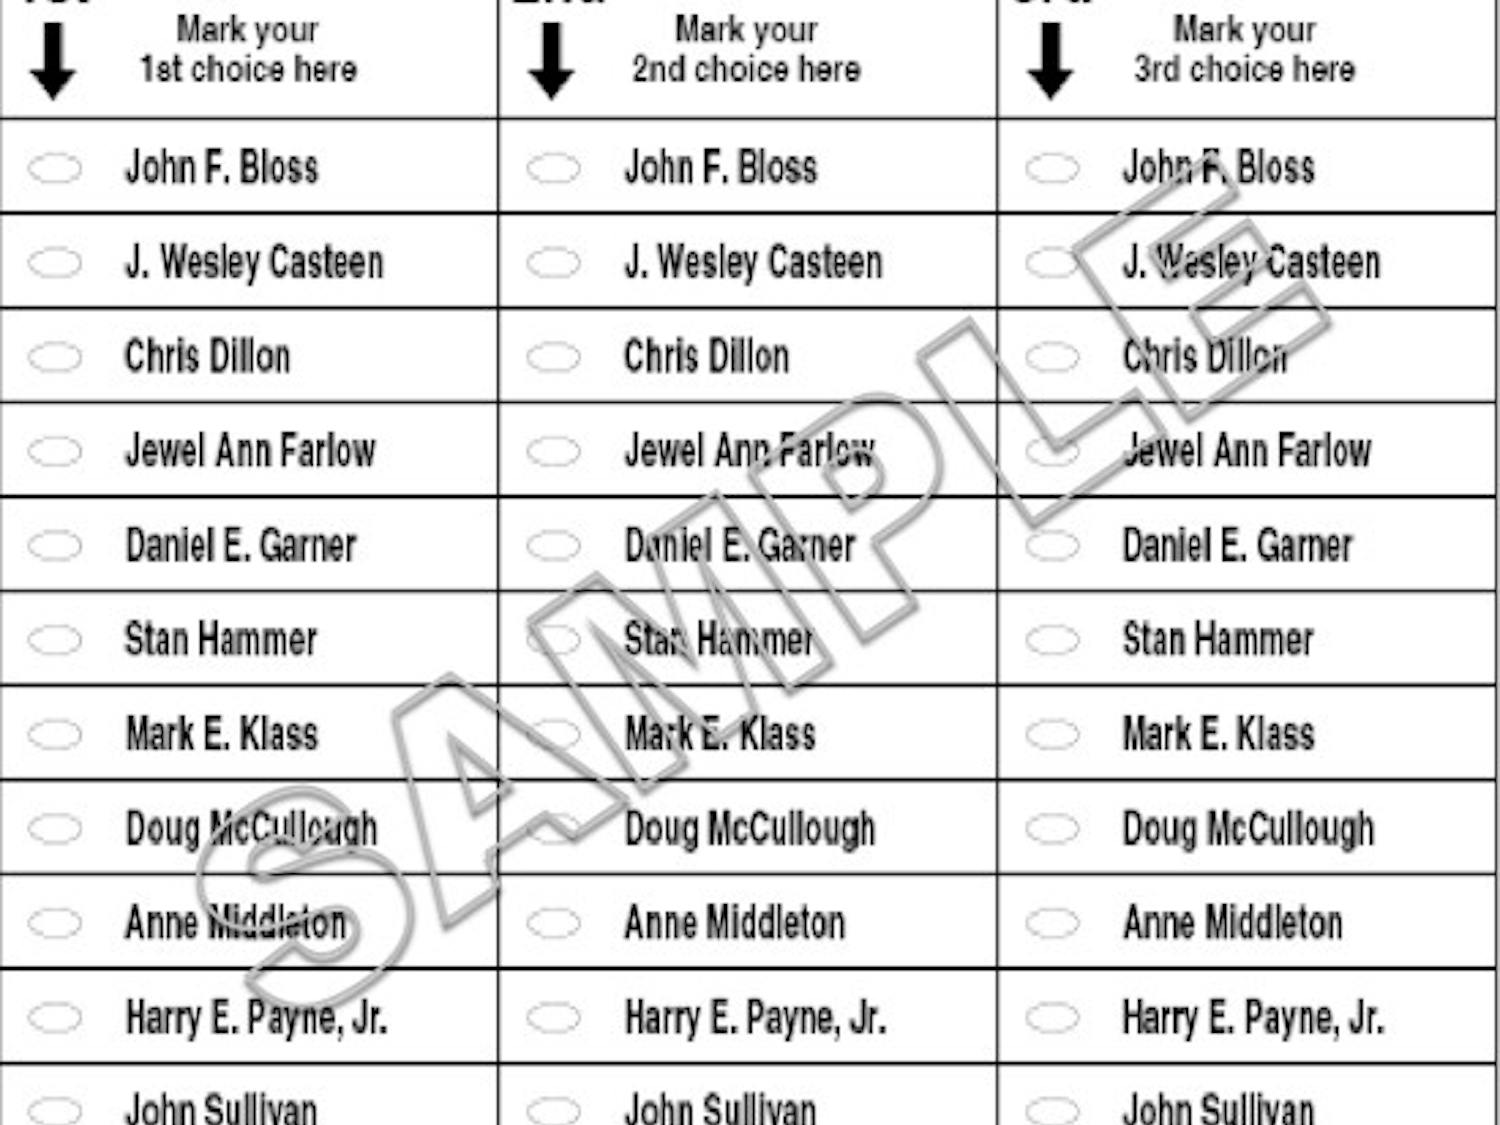 	A sample of the ballot that includes an “instant runoff voting” section. 